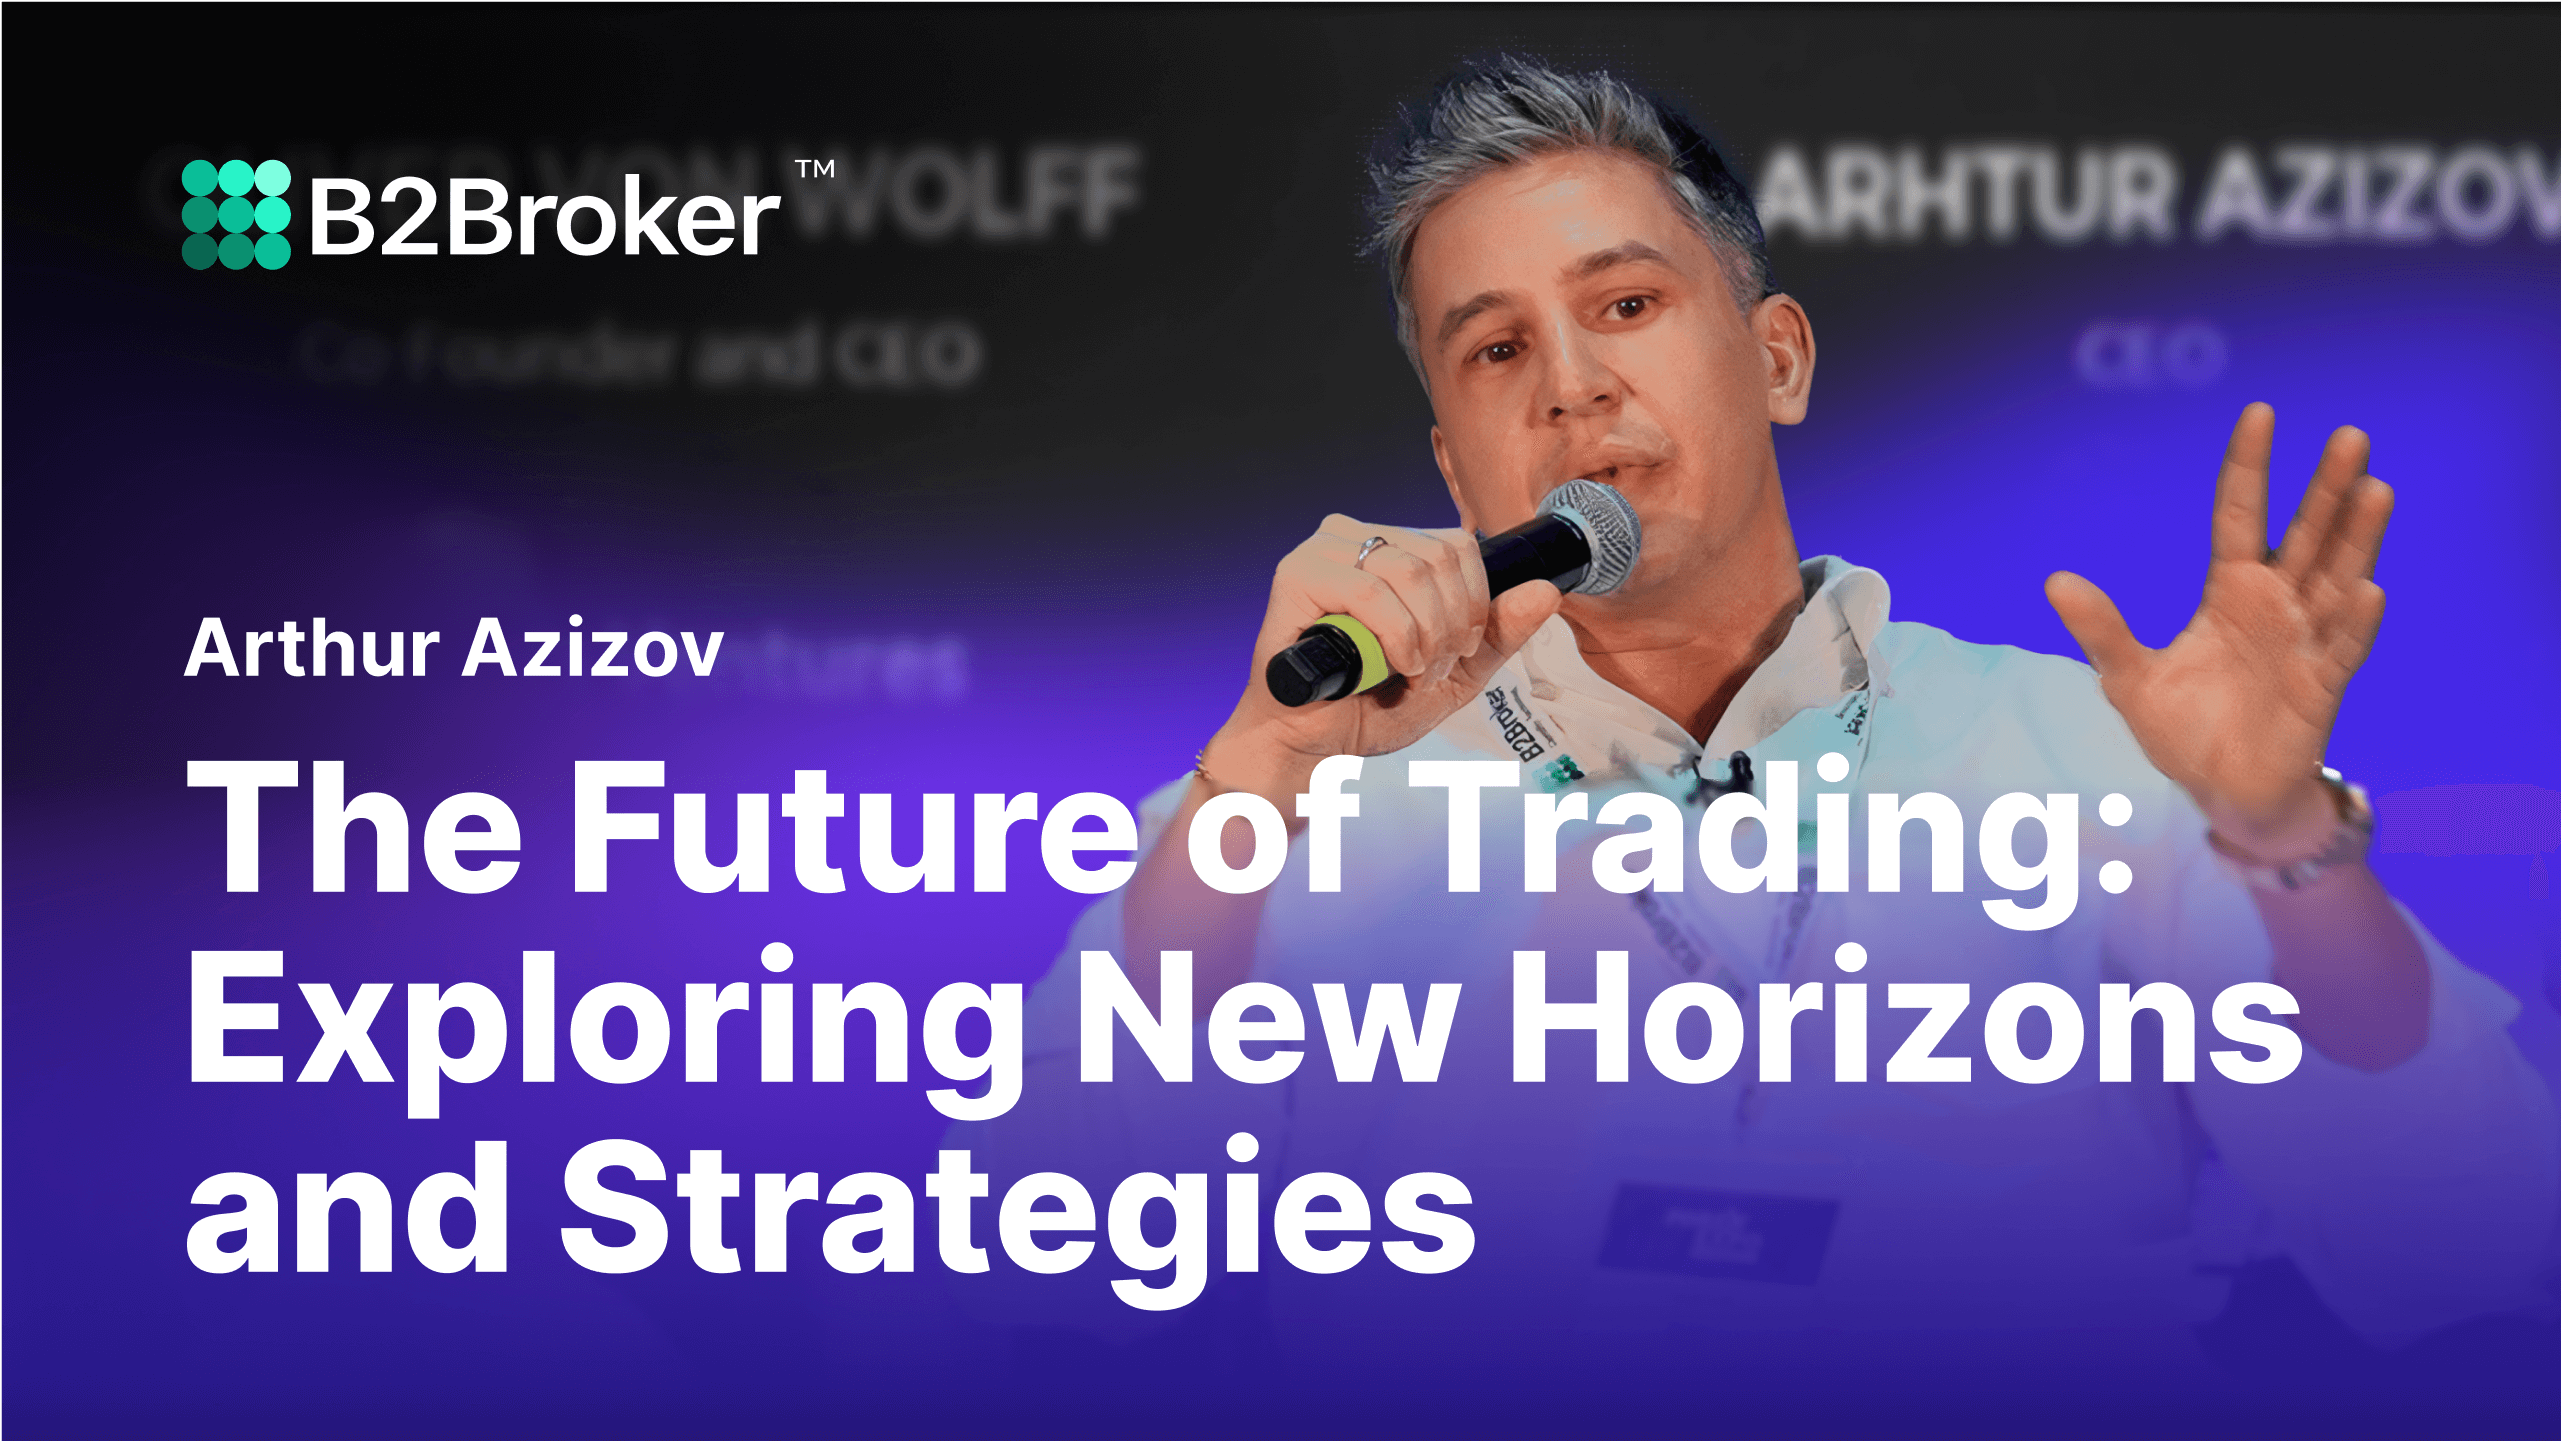 The Future of Trading: Exploring New Horizons and Strategies